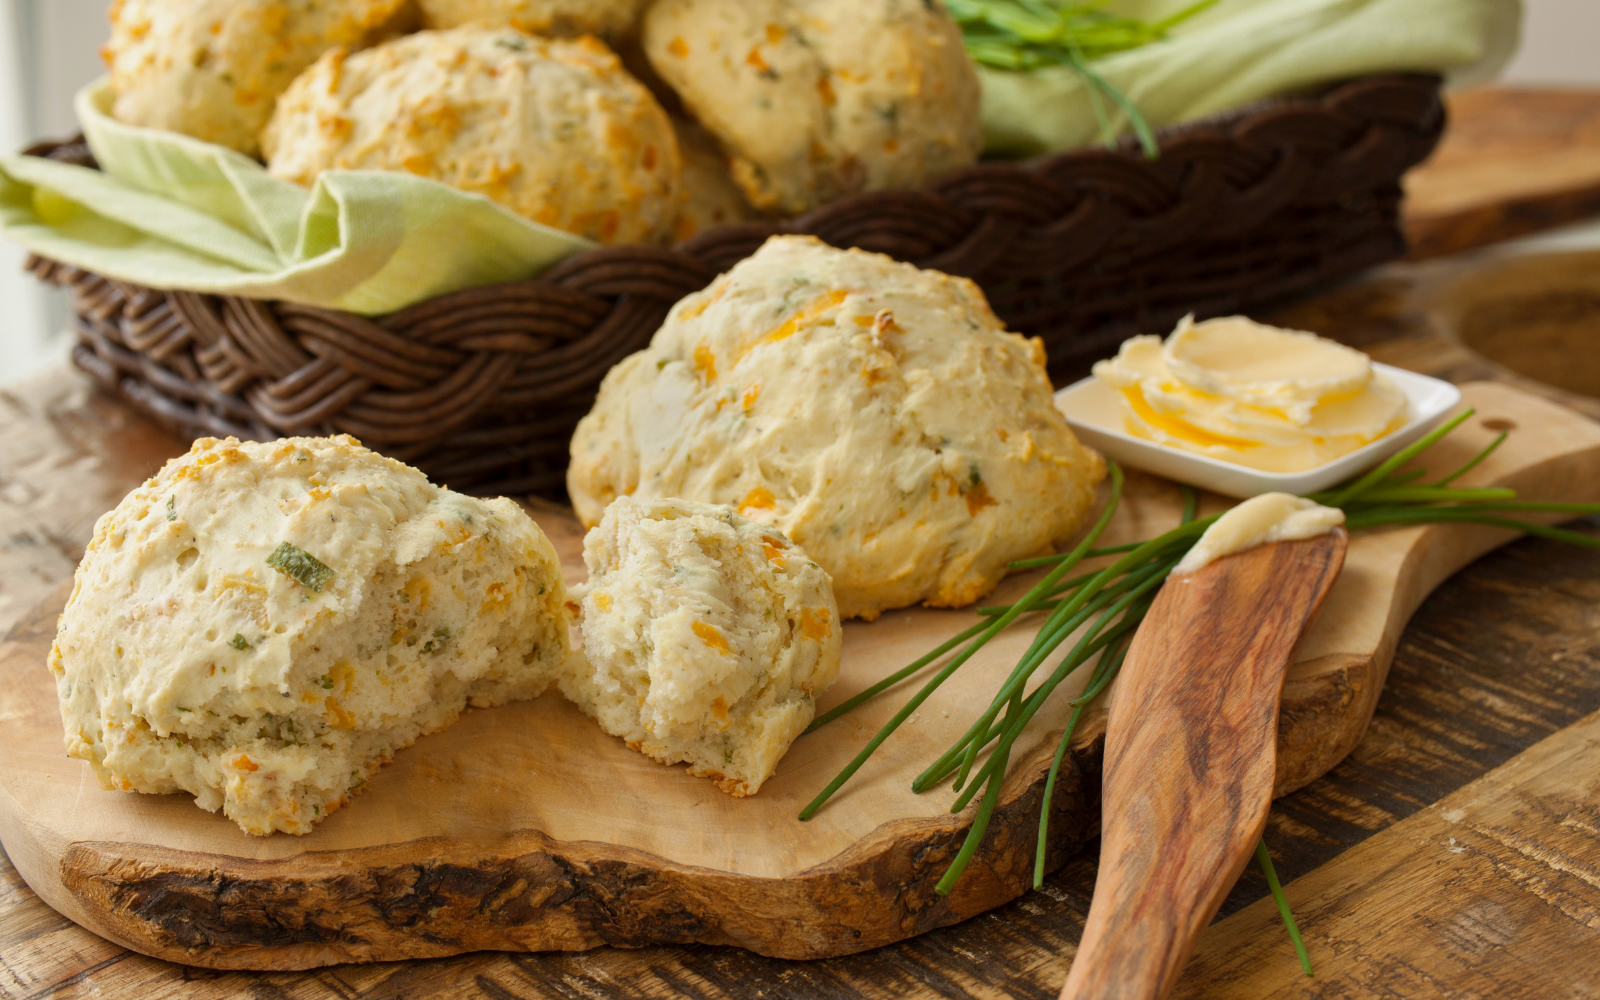 Serenity’s Perfect Paleo Biscuits